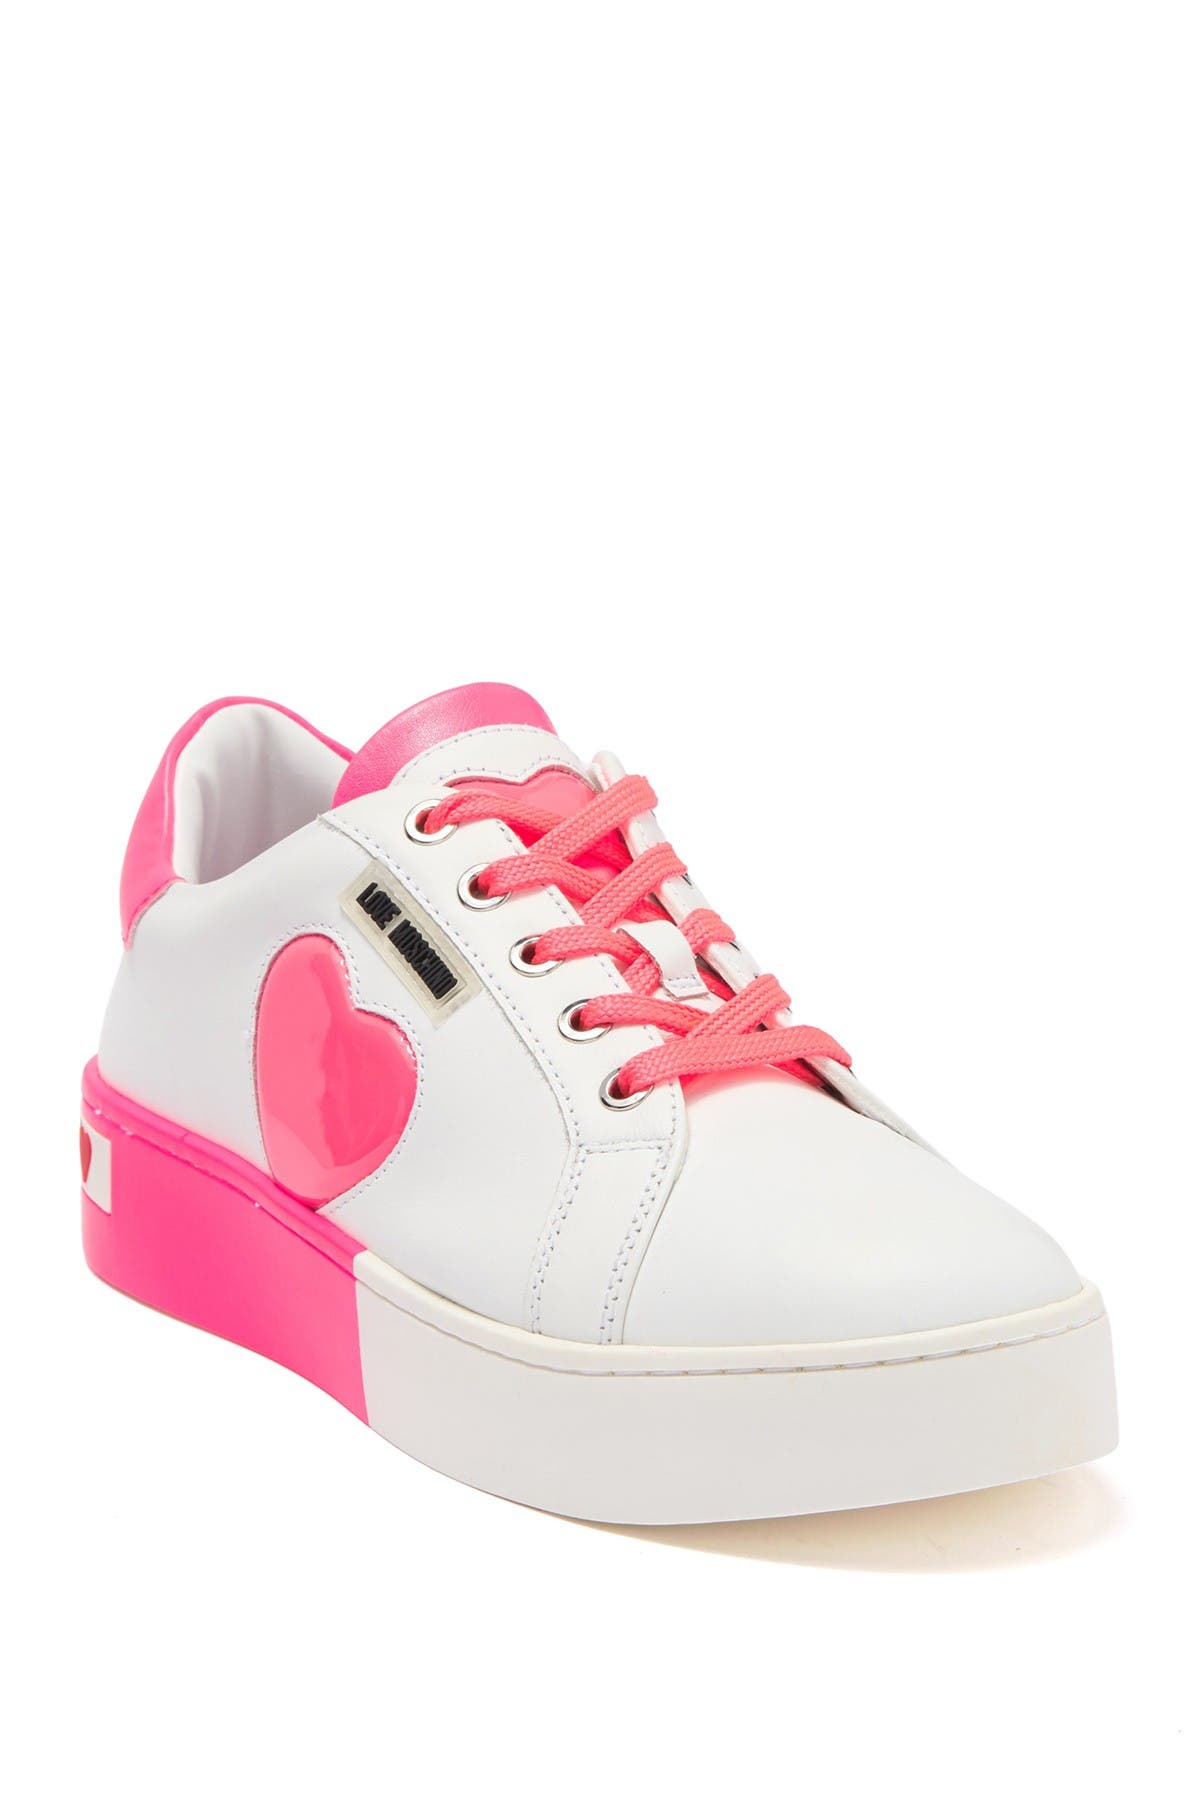 Heart Print Two Tone Leather Sneaker 